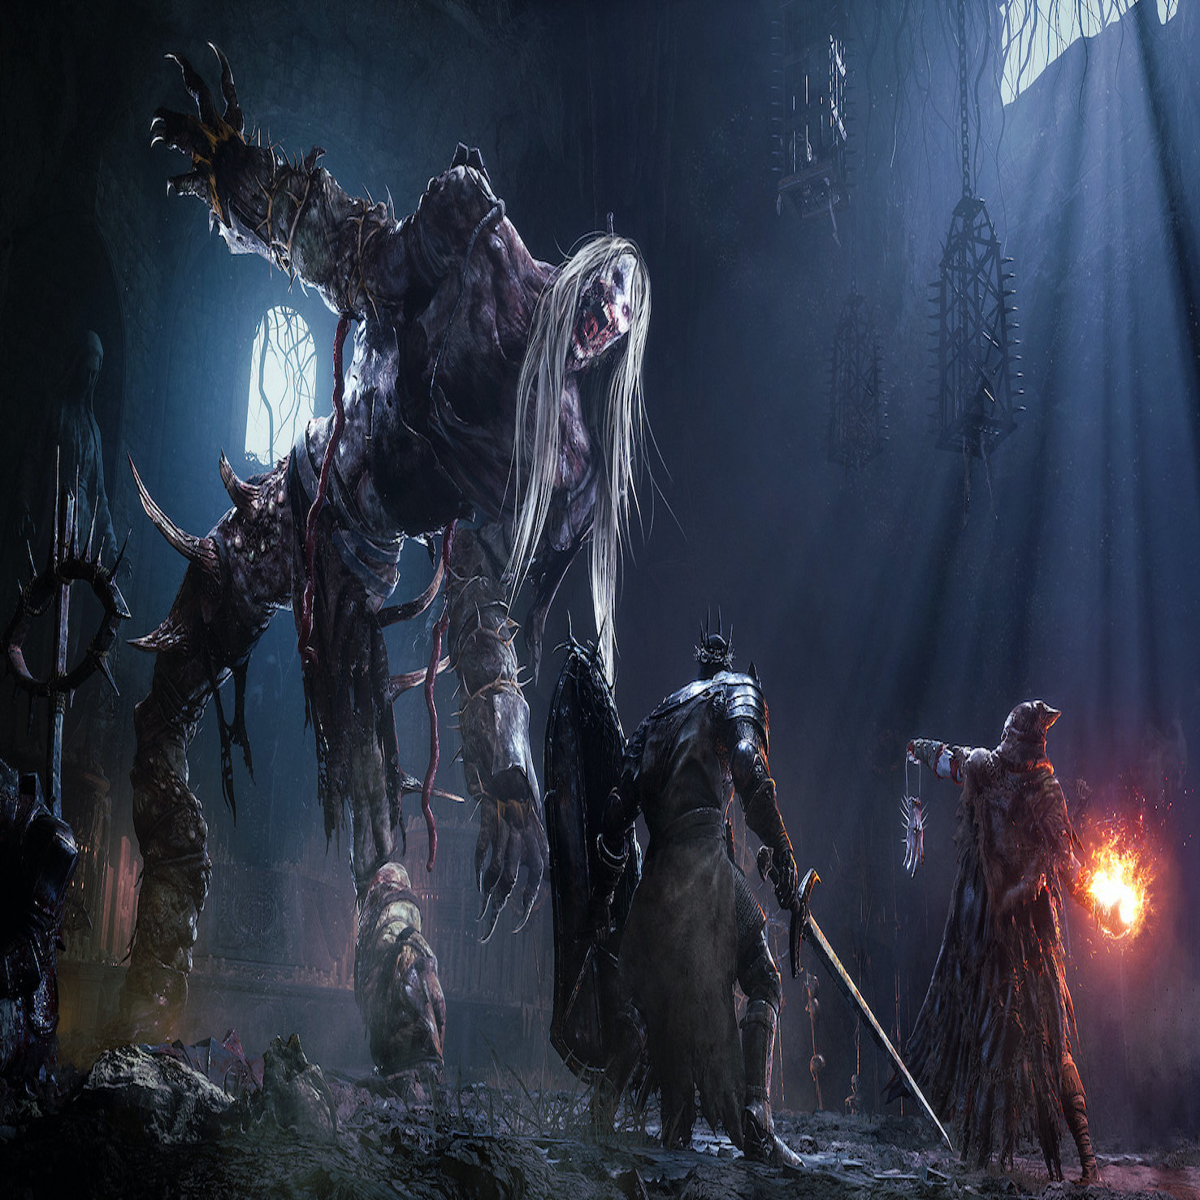 Lords of the Fallen Dual Worlds Look Double the Fun - Fextralife